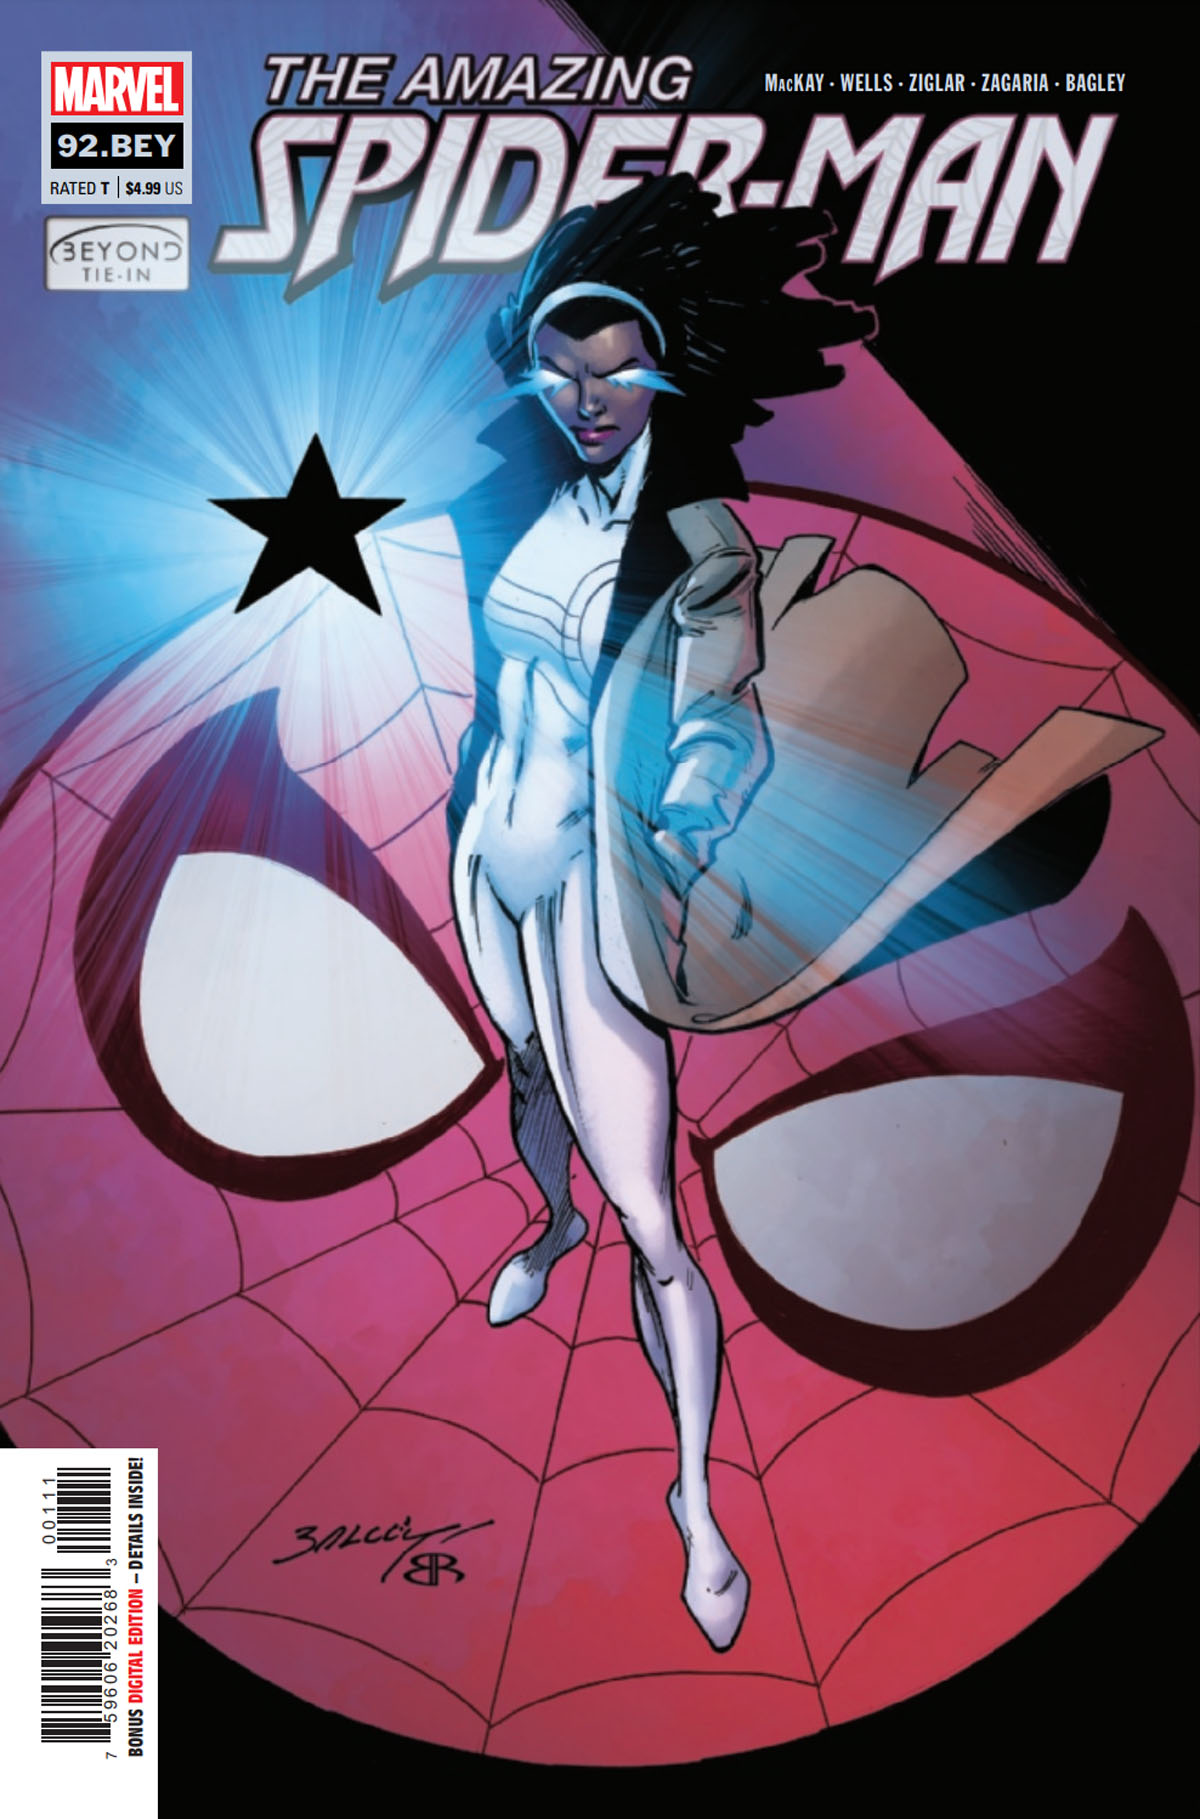 Amazing Spider-Man #92.BEY cover